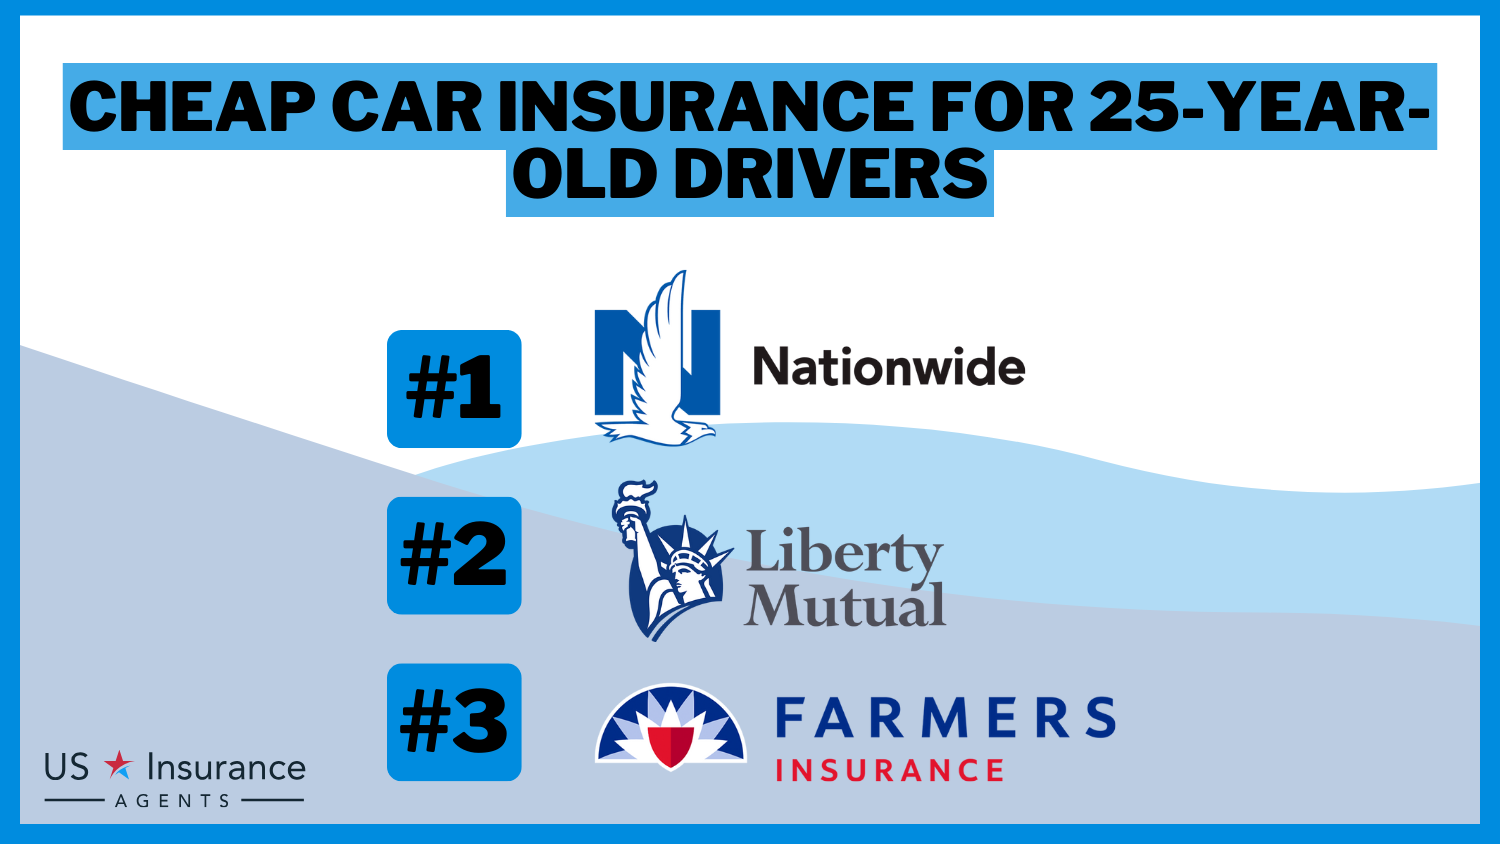 Cheap Car Insurance for 25-Year-Old Drivers: Nationwide, Liberty Mutual, and Farmers